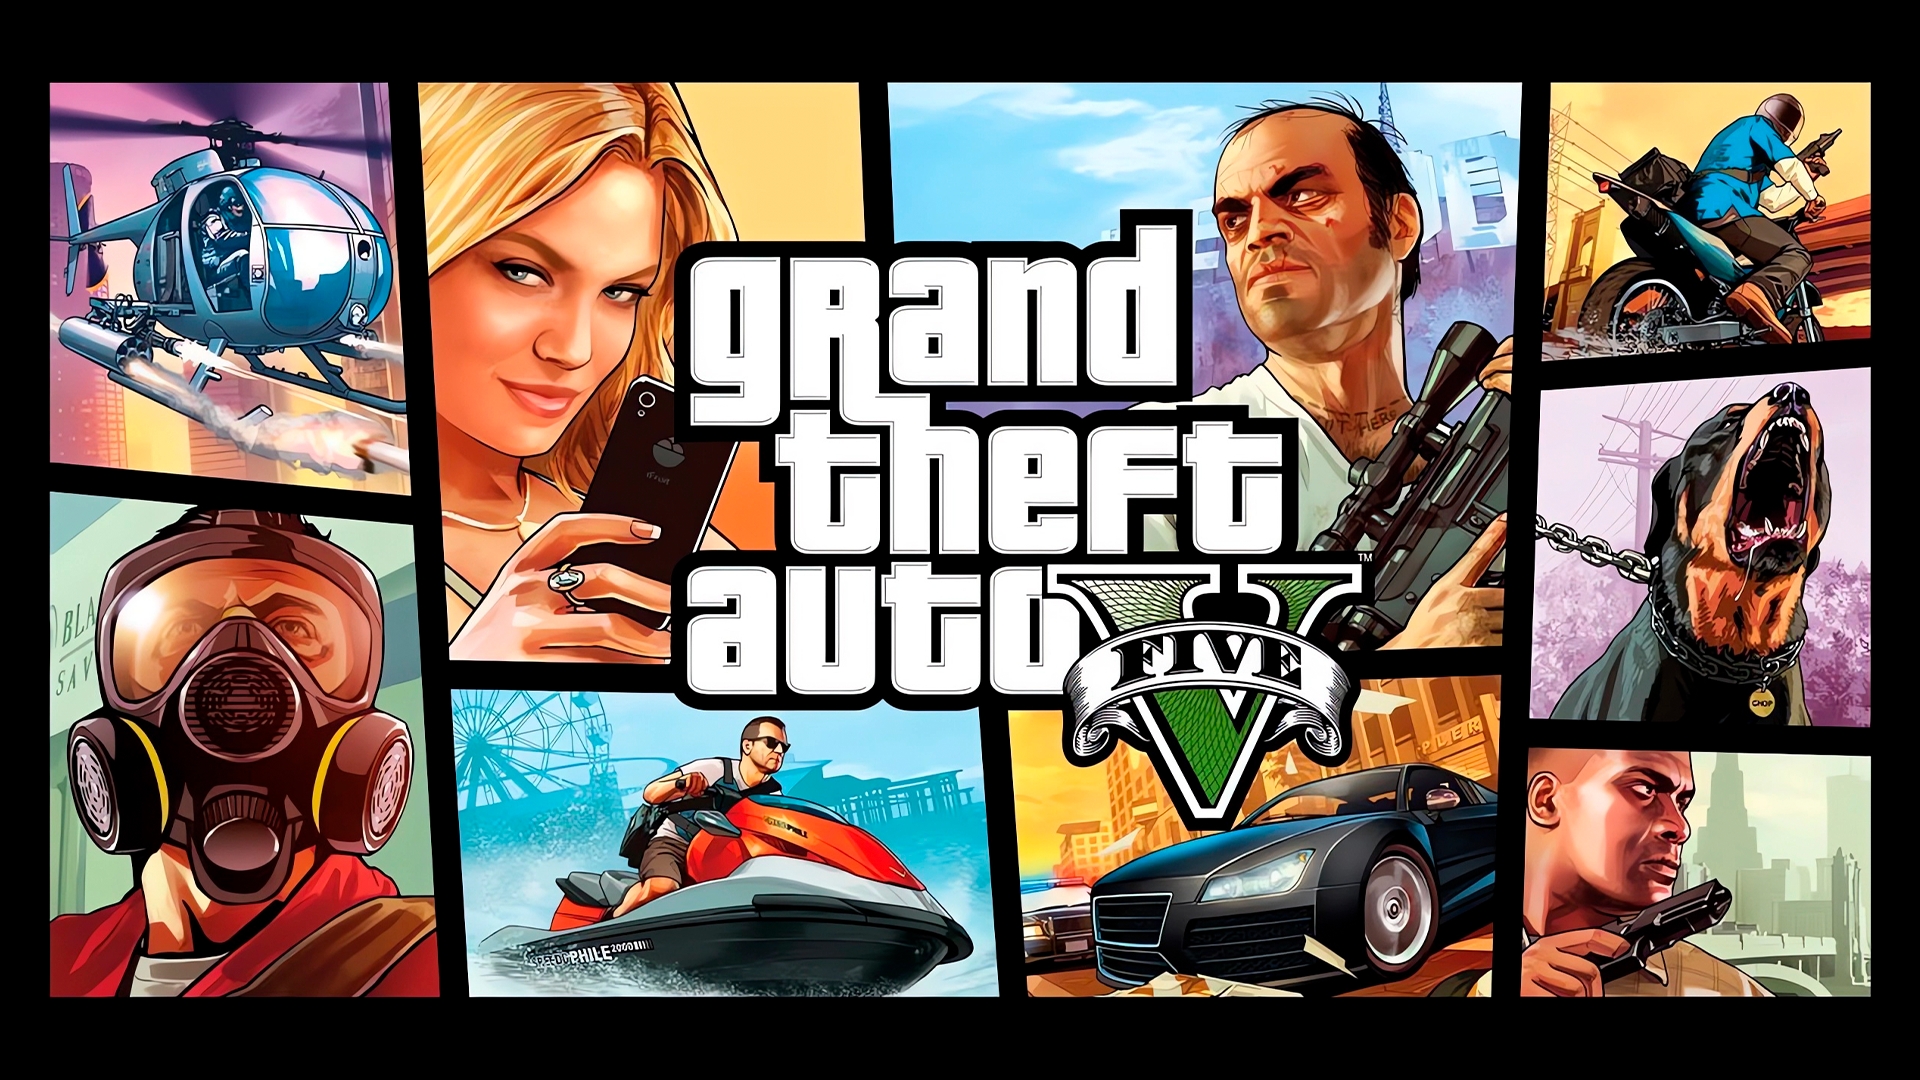 can you change the storyline in gta v without having to redo the whole game?